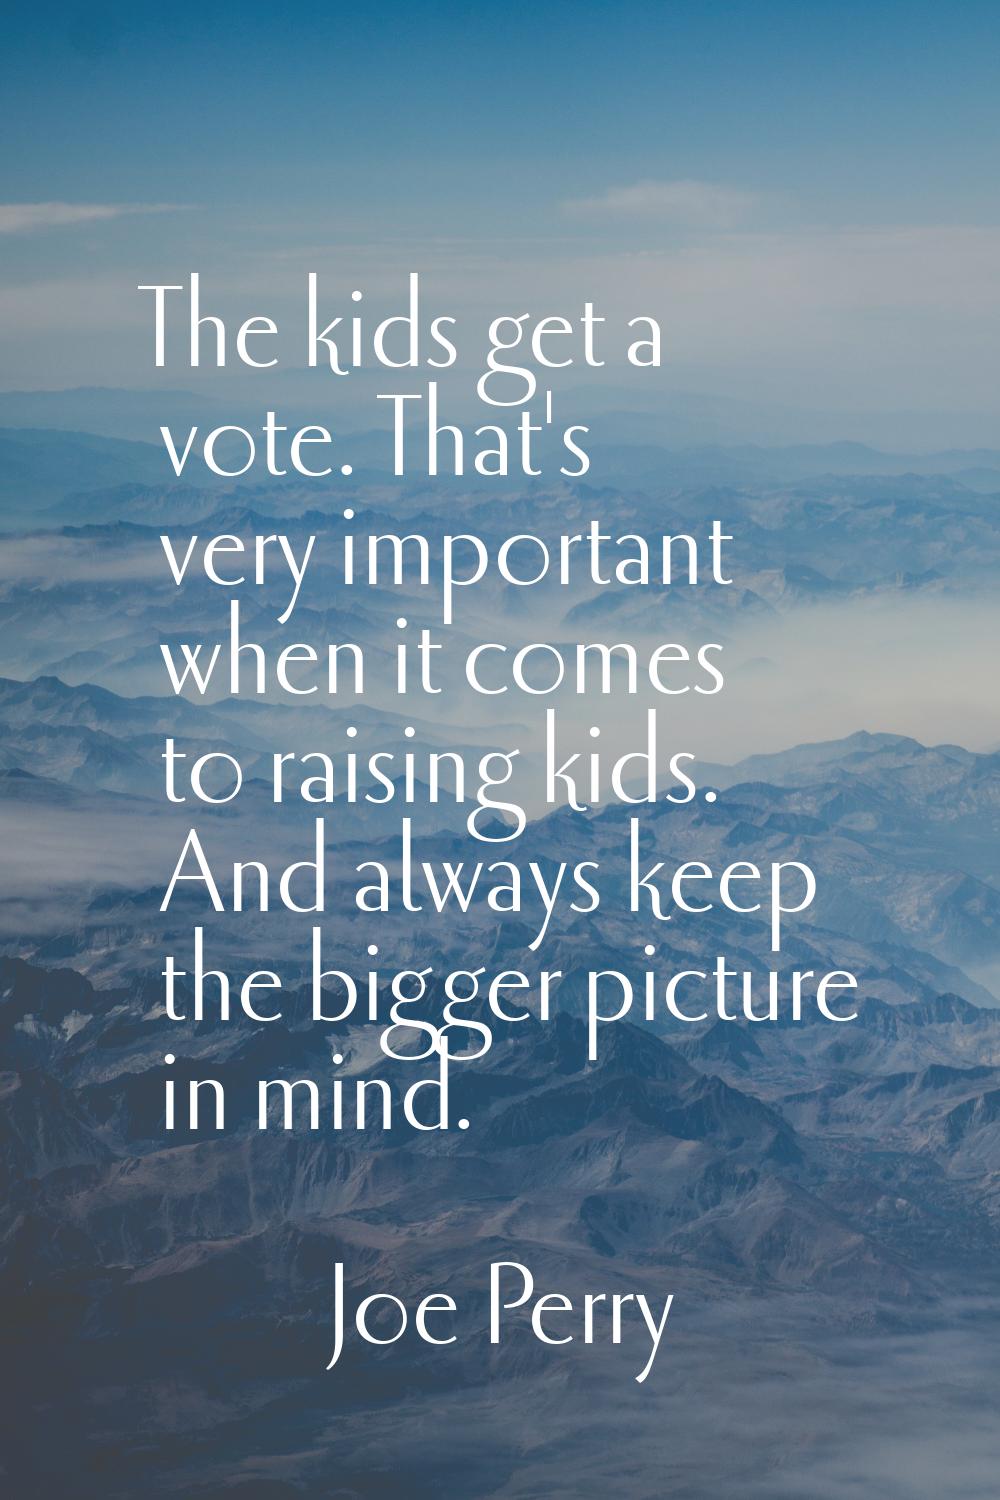 The kids get a vote. That's very important when it comes to raising kids. And always keep the bigge